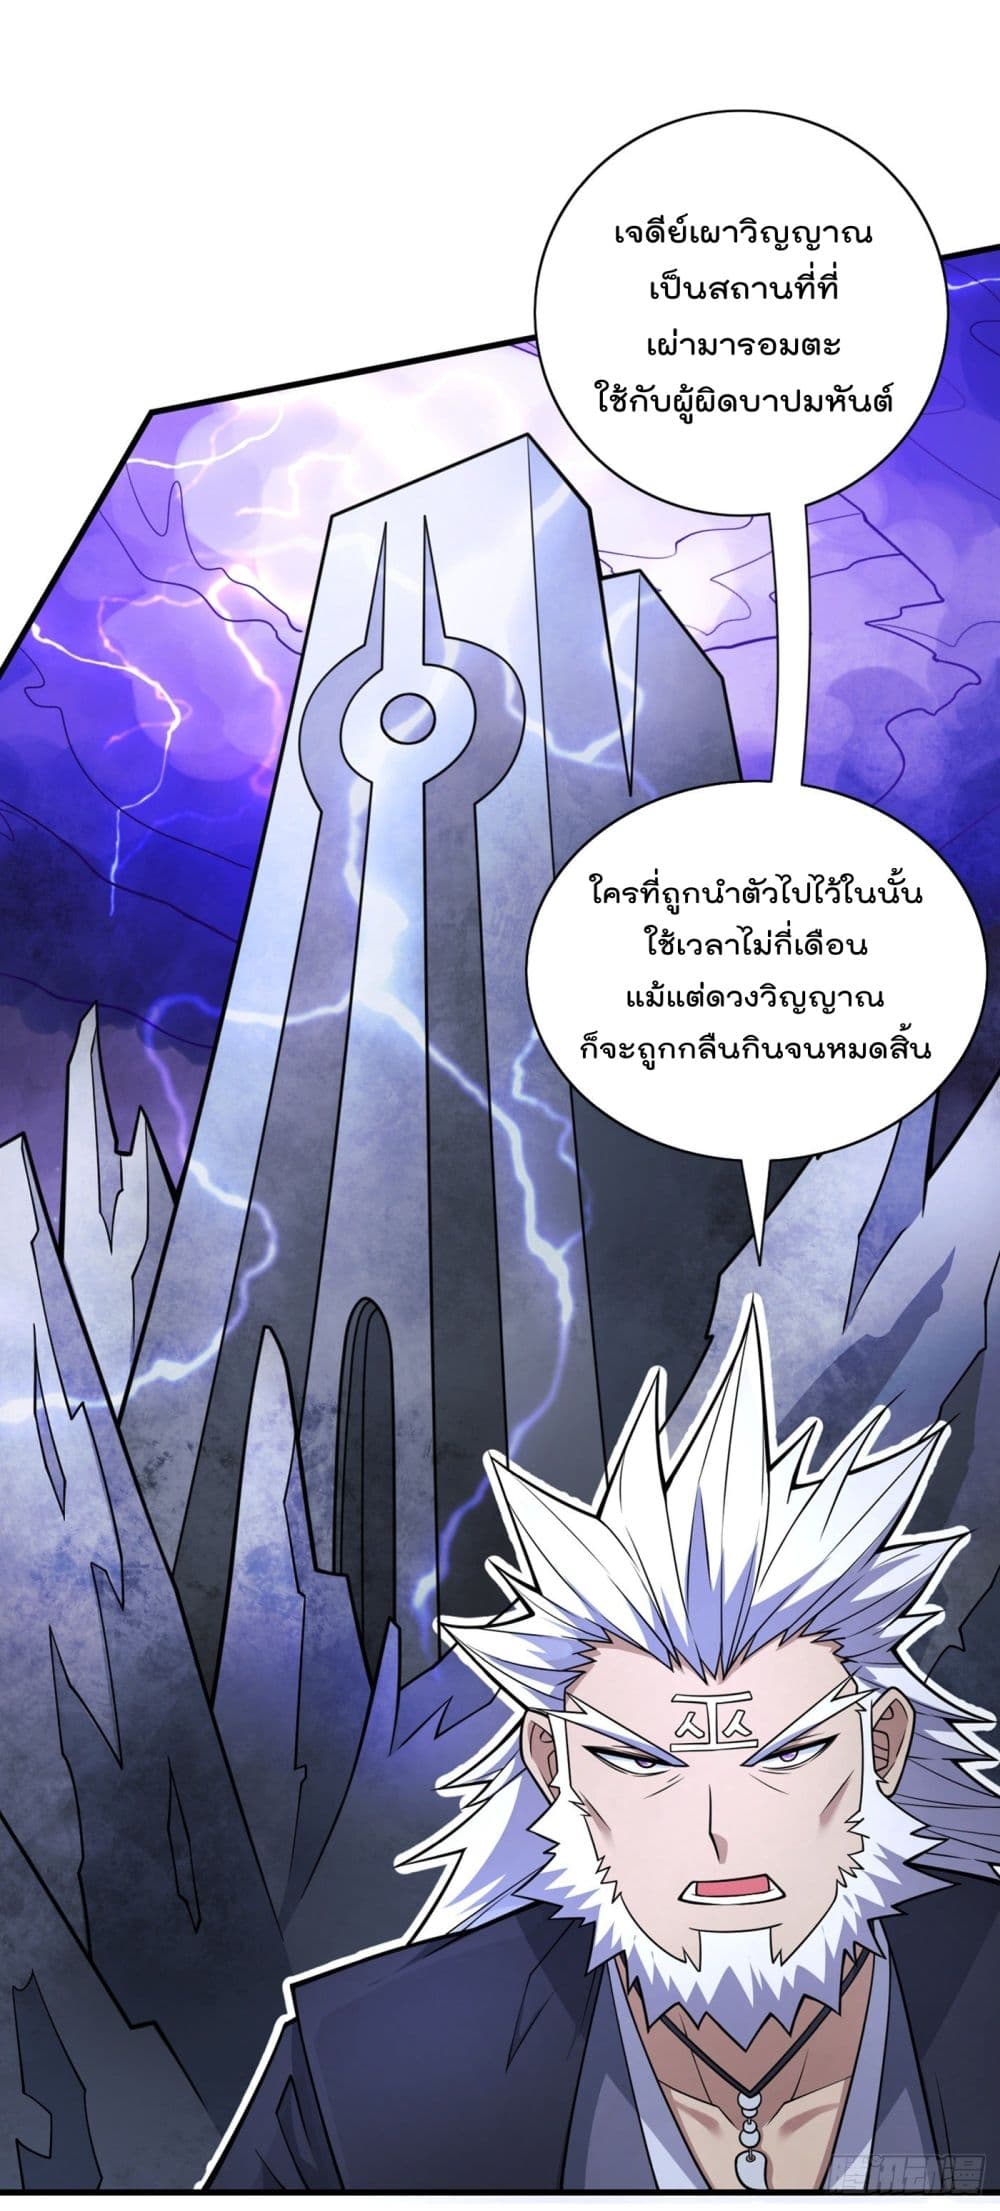 99 Ways to Become Heroes by Beauty Master ตอนที่ 88 (12)